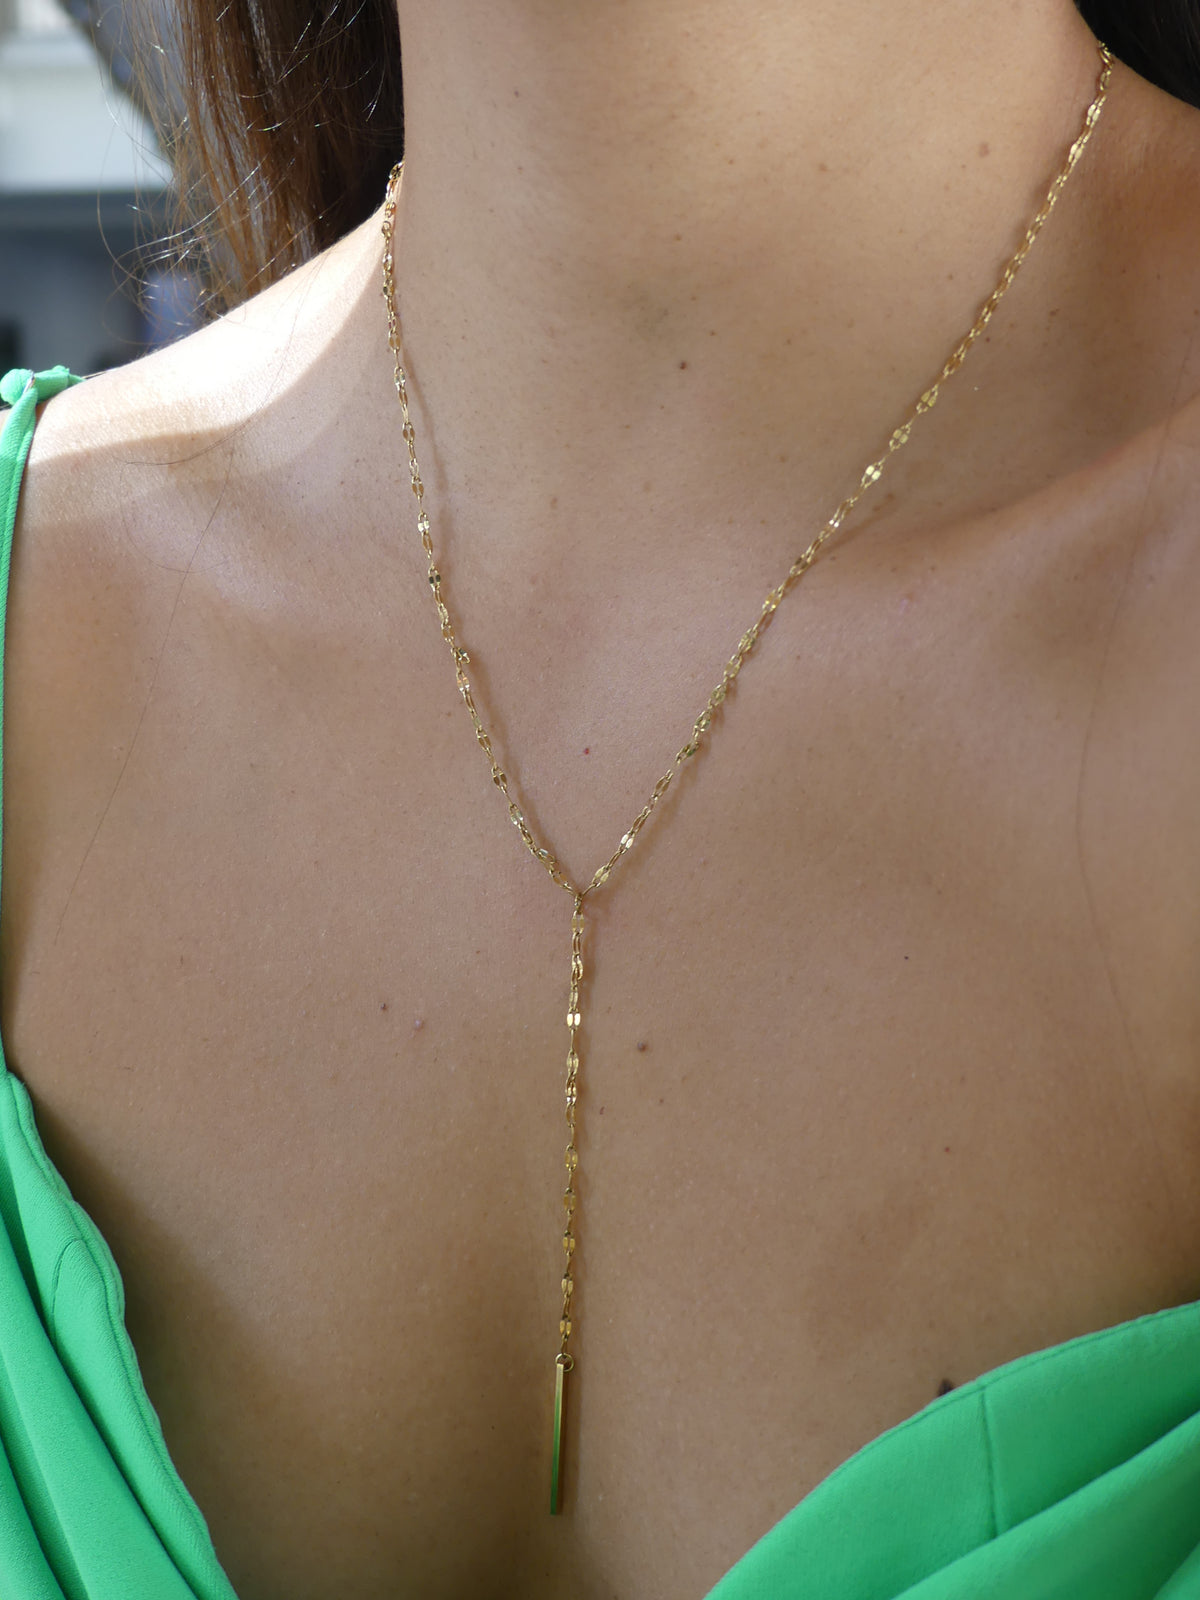 necklace, gold necklaces, gold plated necklaces, lariat necklaces, dainty gold necklaces, necklaces for low cut dresses, plain gold necklaces, statement necklaces, fashion jewelry, stainless steel necklaces, jewelry, birthday gifts, bathing suit jewelry, waterproof necklaces, trending jewelry, layering necklace ideas, gold plated necklaces, designer jewelry, birthday gifts, cool jewelry trending on tiktok, gold accessories, kesley jewelry